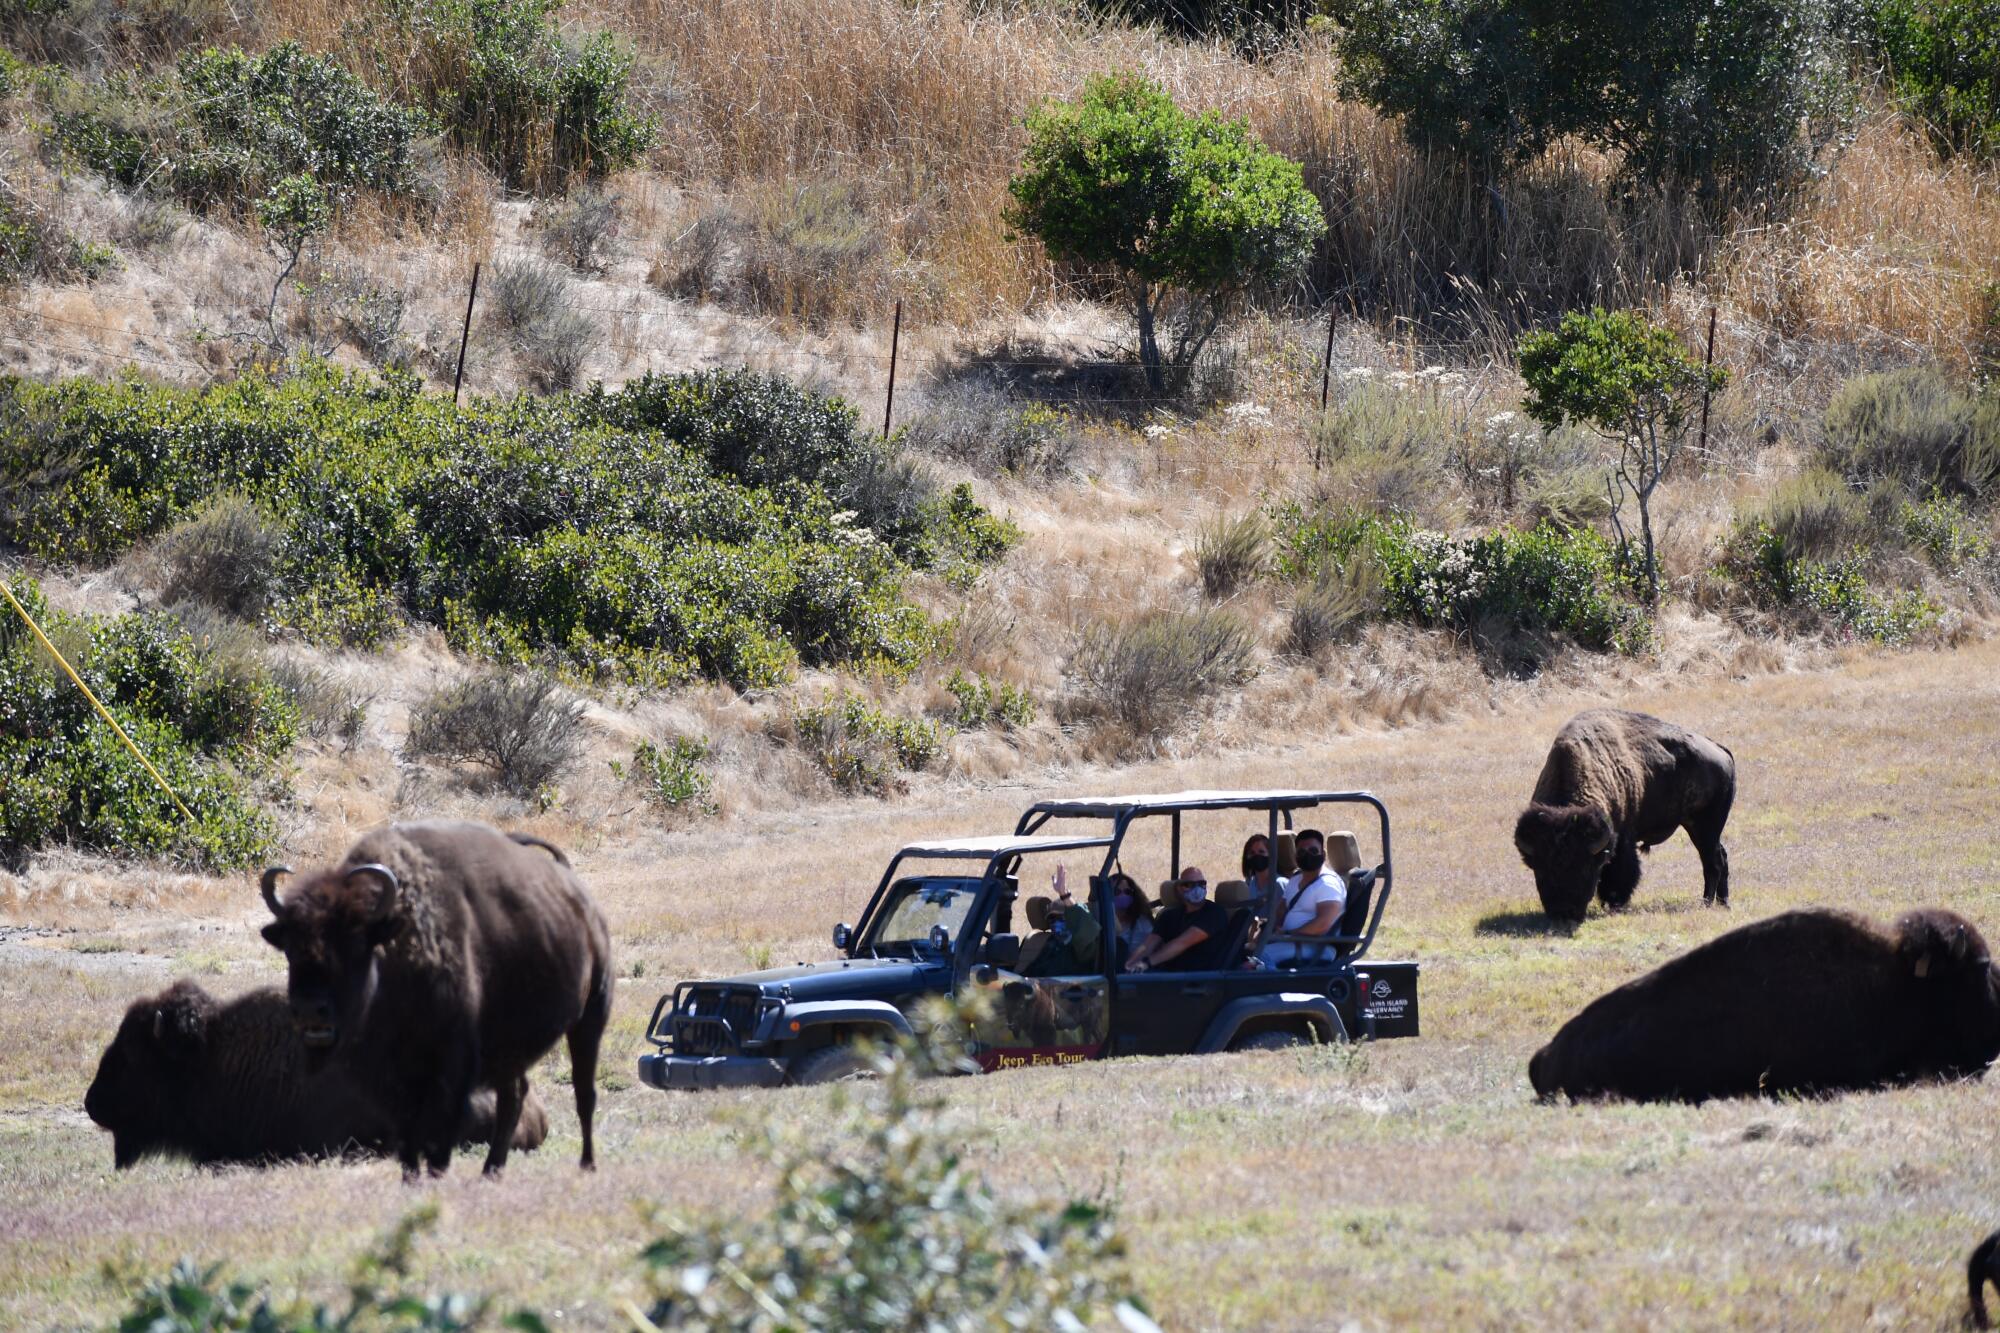 Bison and a Jeep with people on the Catalina Island Conservancy Eco Tour.